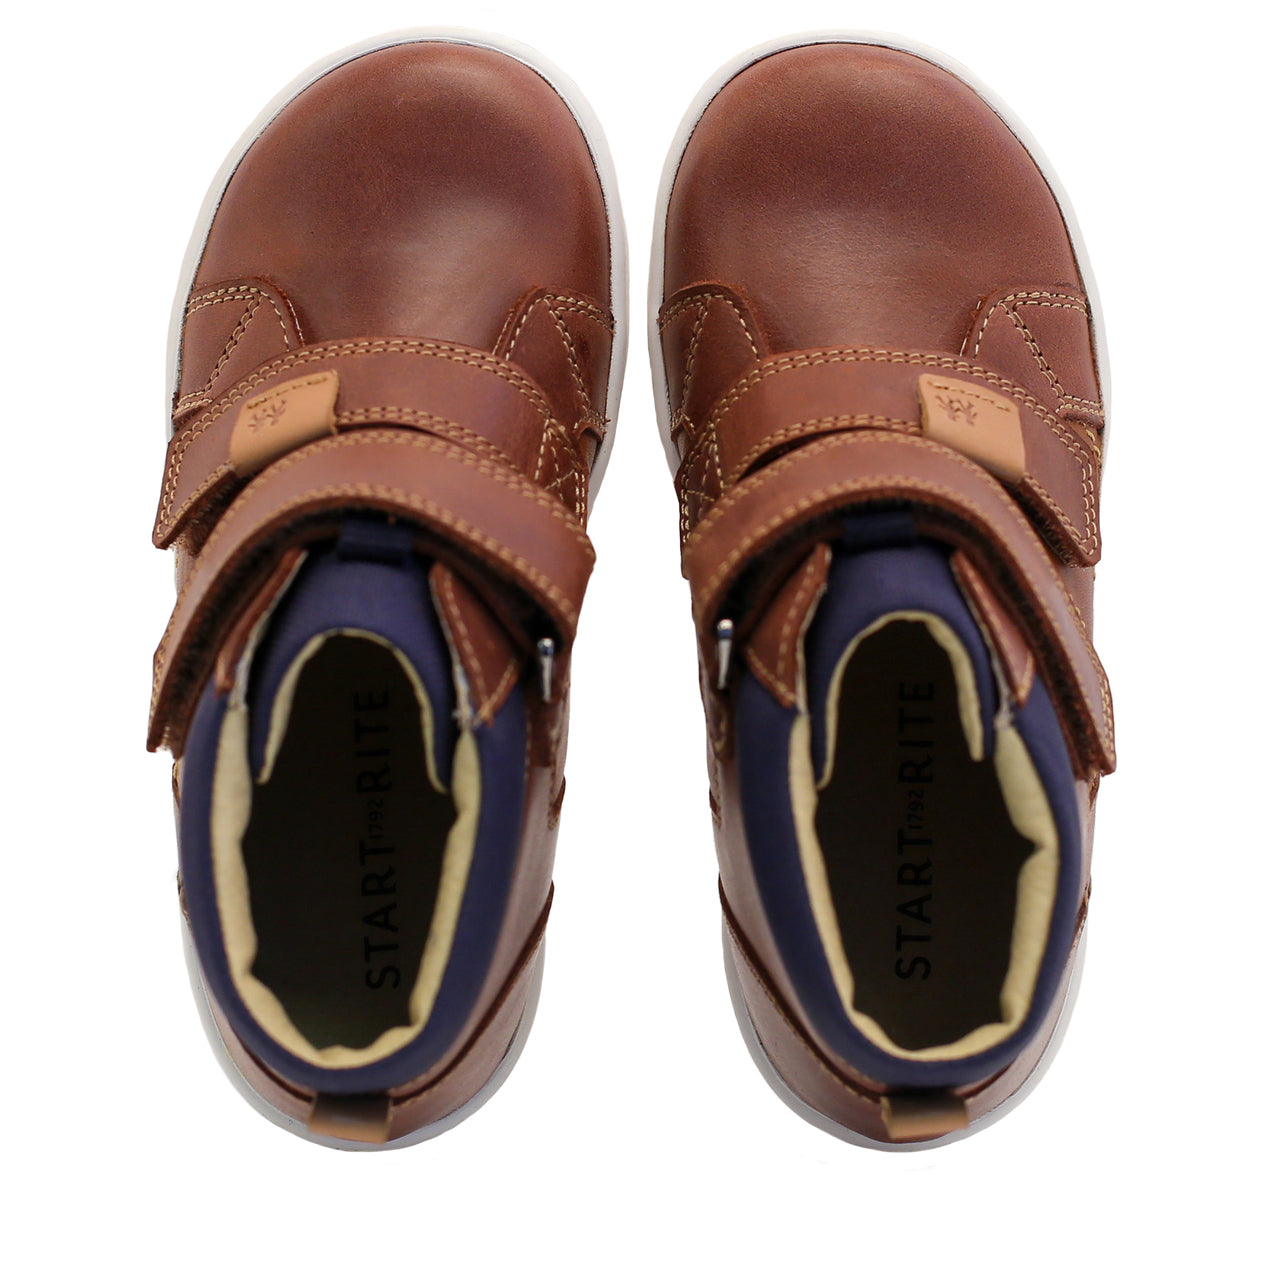 StartRite Discover 1743_0 Boys Brown Leather Touch Fastening High Tops